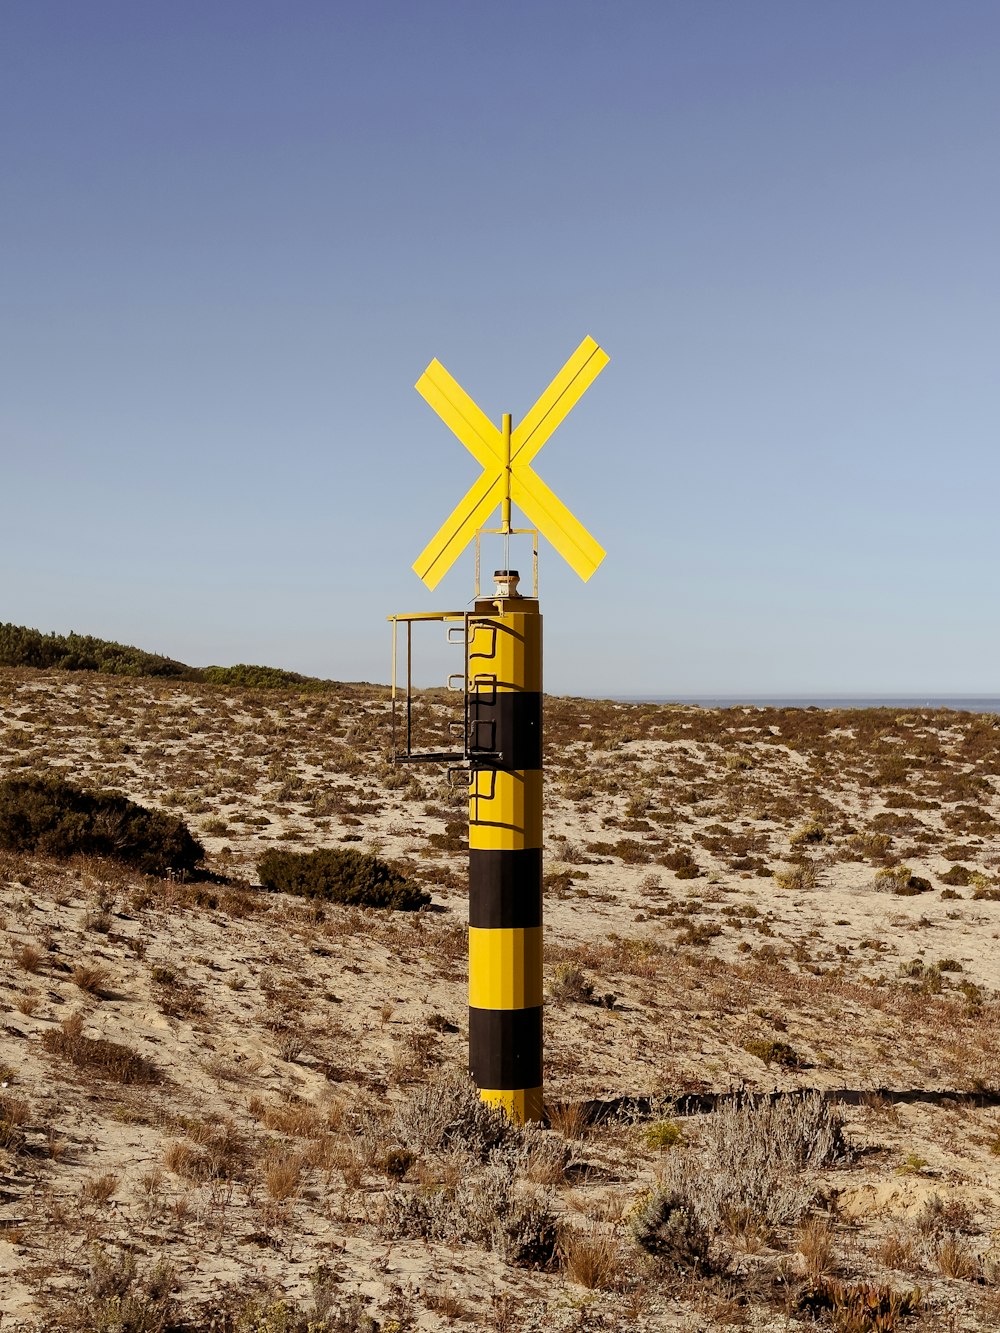 a yellow and black pole in the middle of a desert